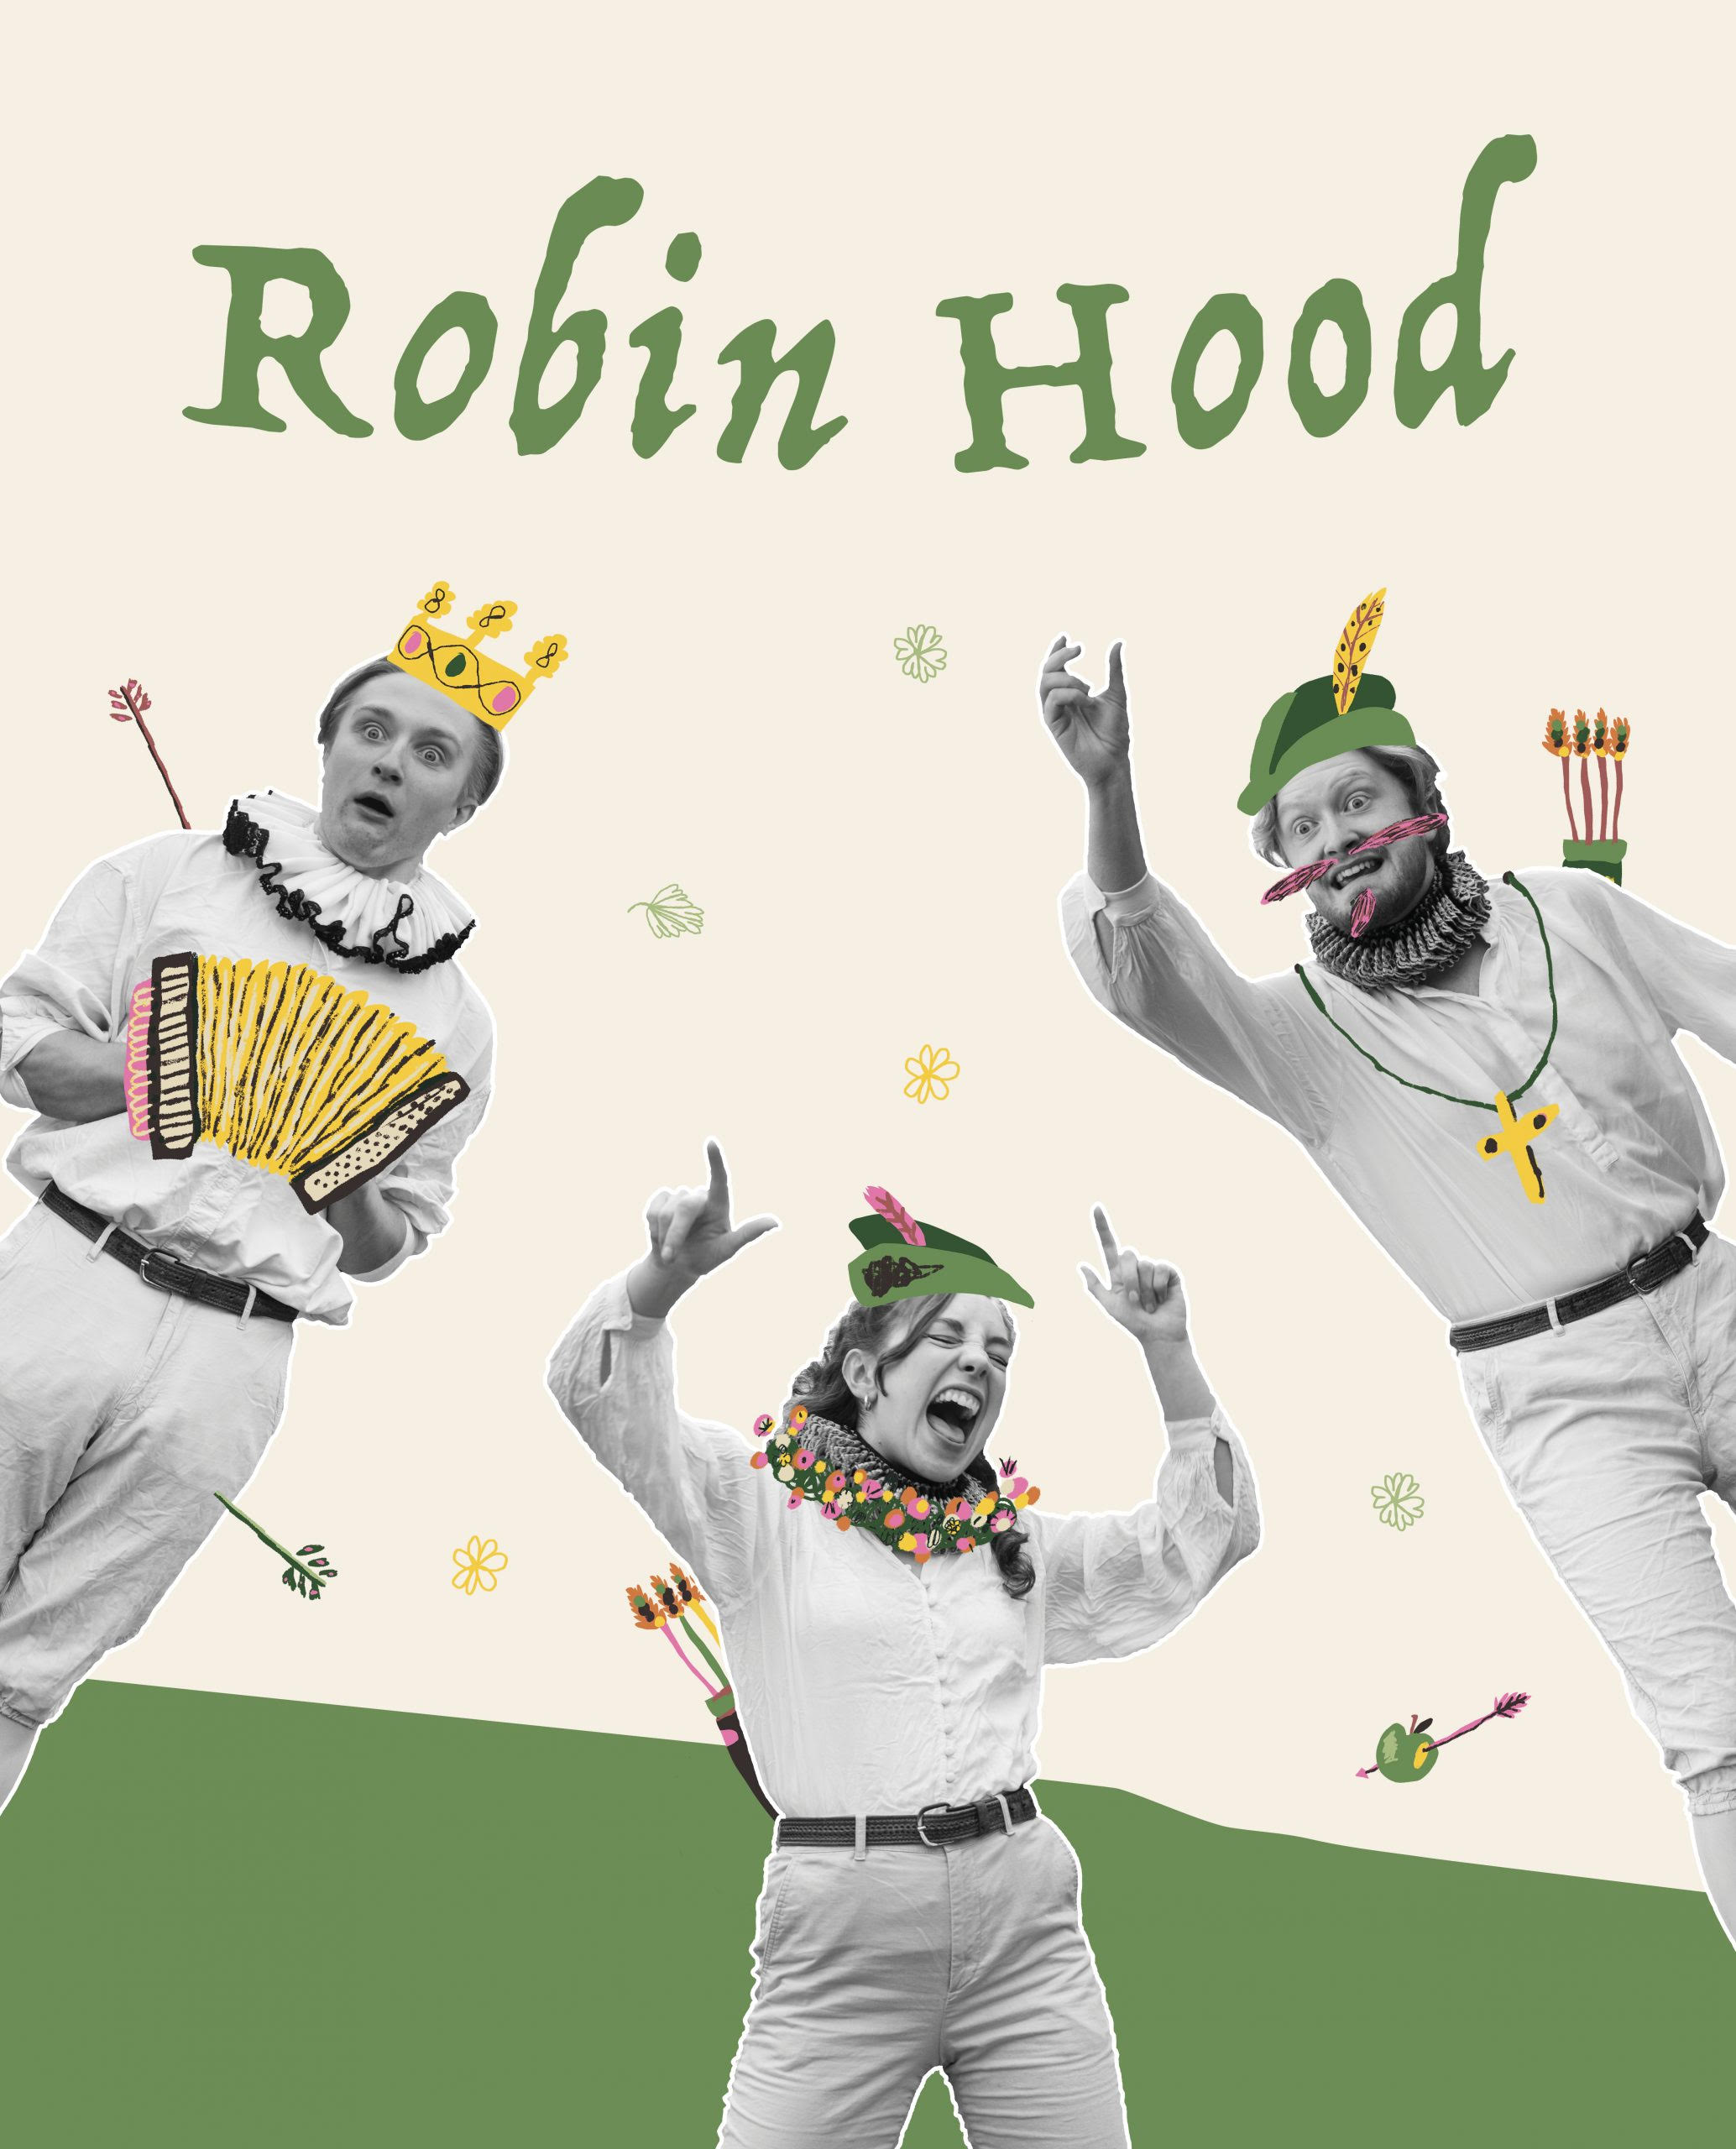 3 people in costume cut out on a graphical background with the text Robin Hood above